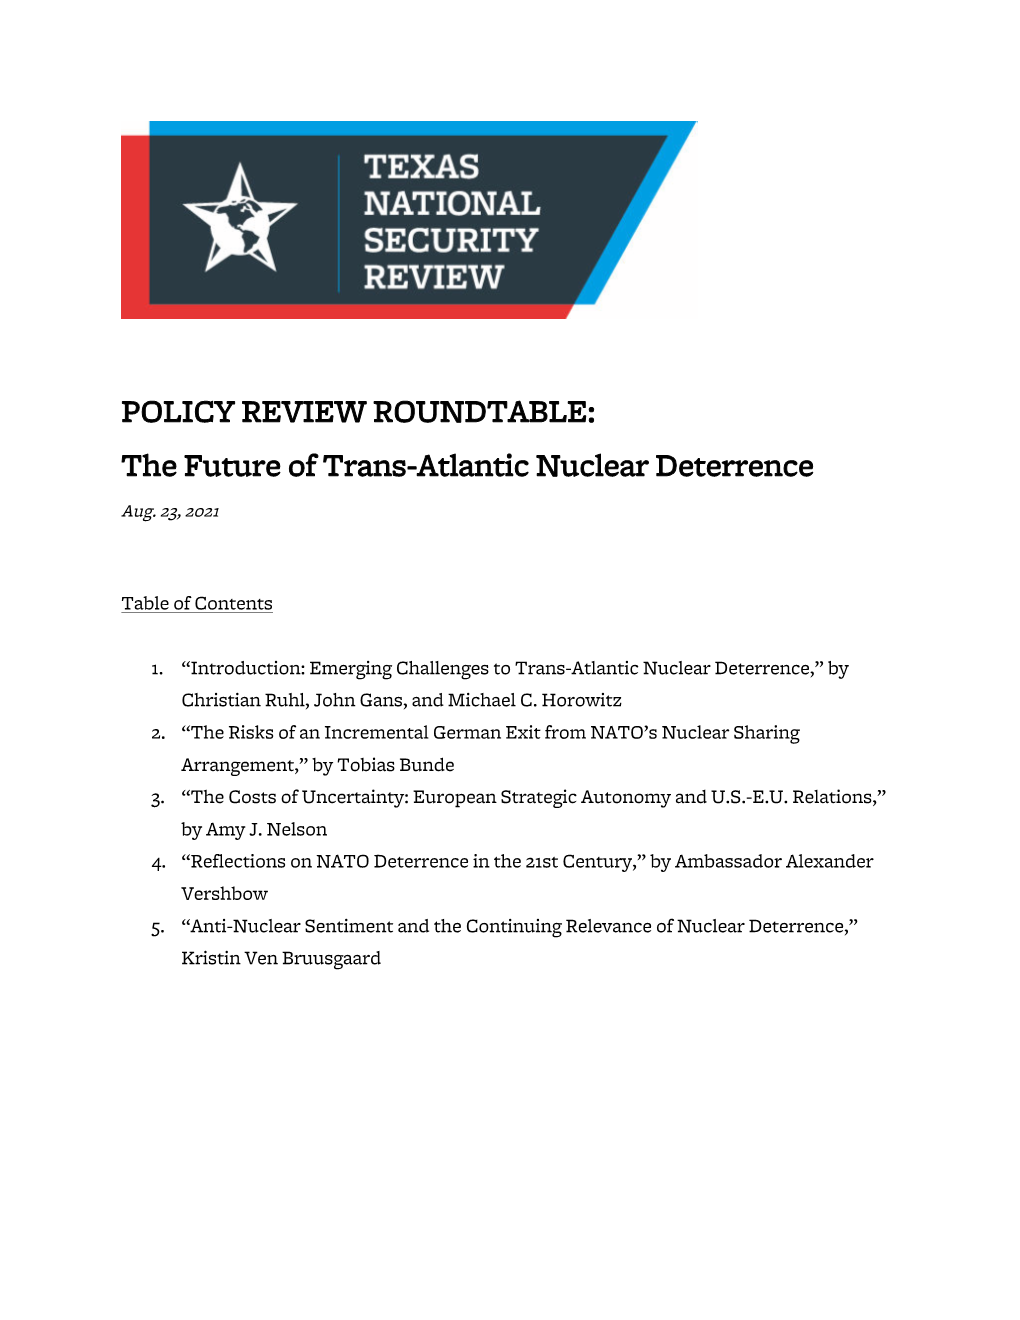 The Future of Trans-Atlantic Nuclear Deterrence